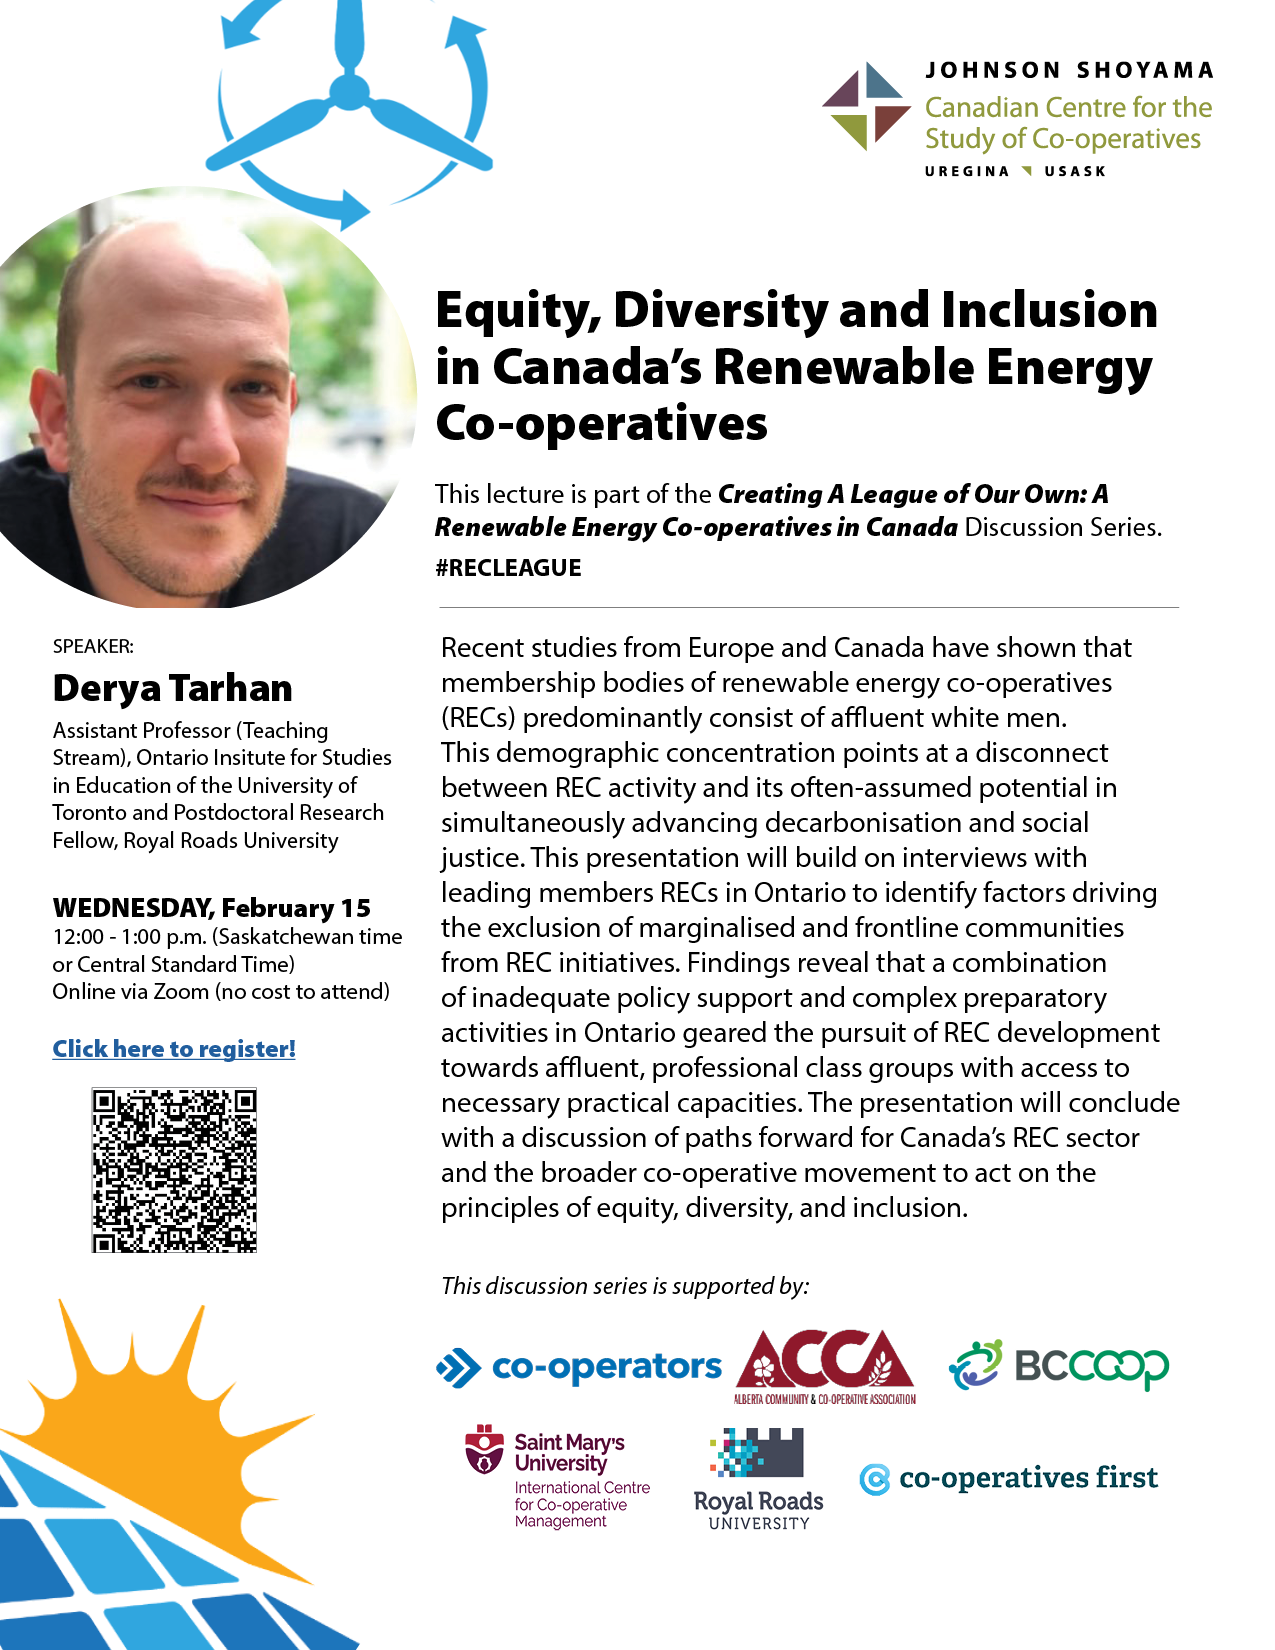 Equity, Diversity and Inclusion in Canada’s Renewable Energy Co-operatives featuring Derya Tarhan